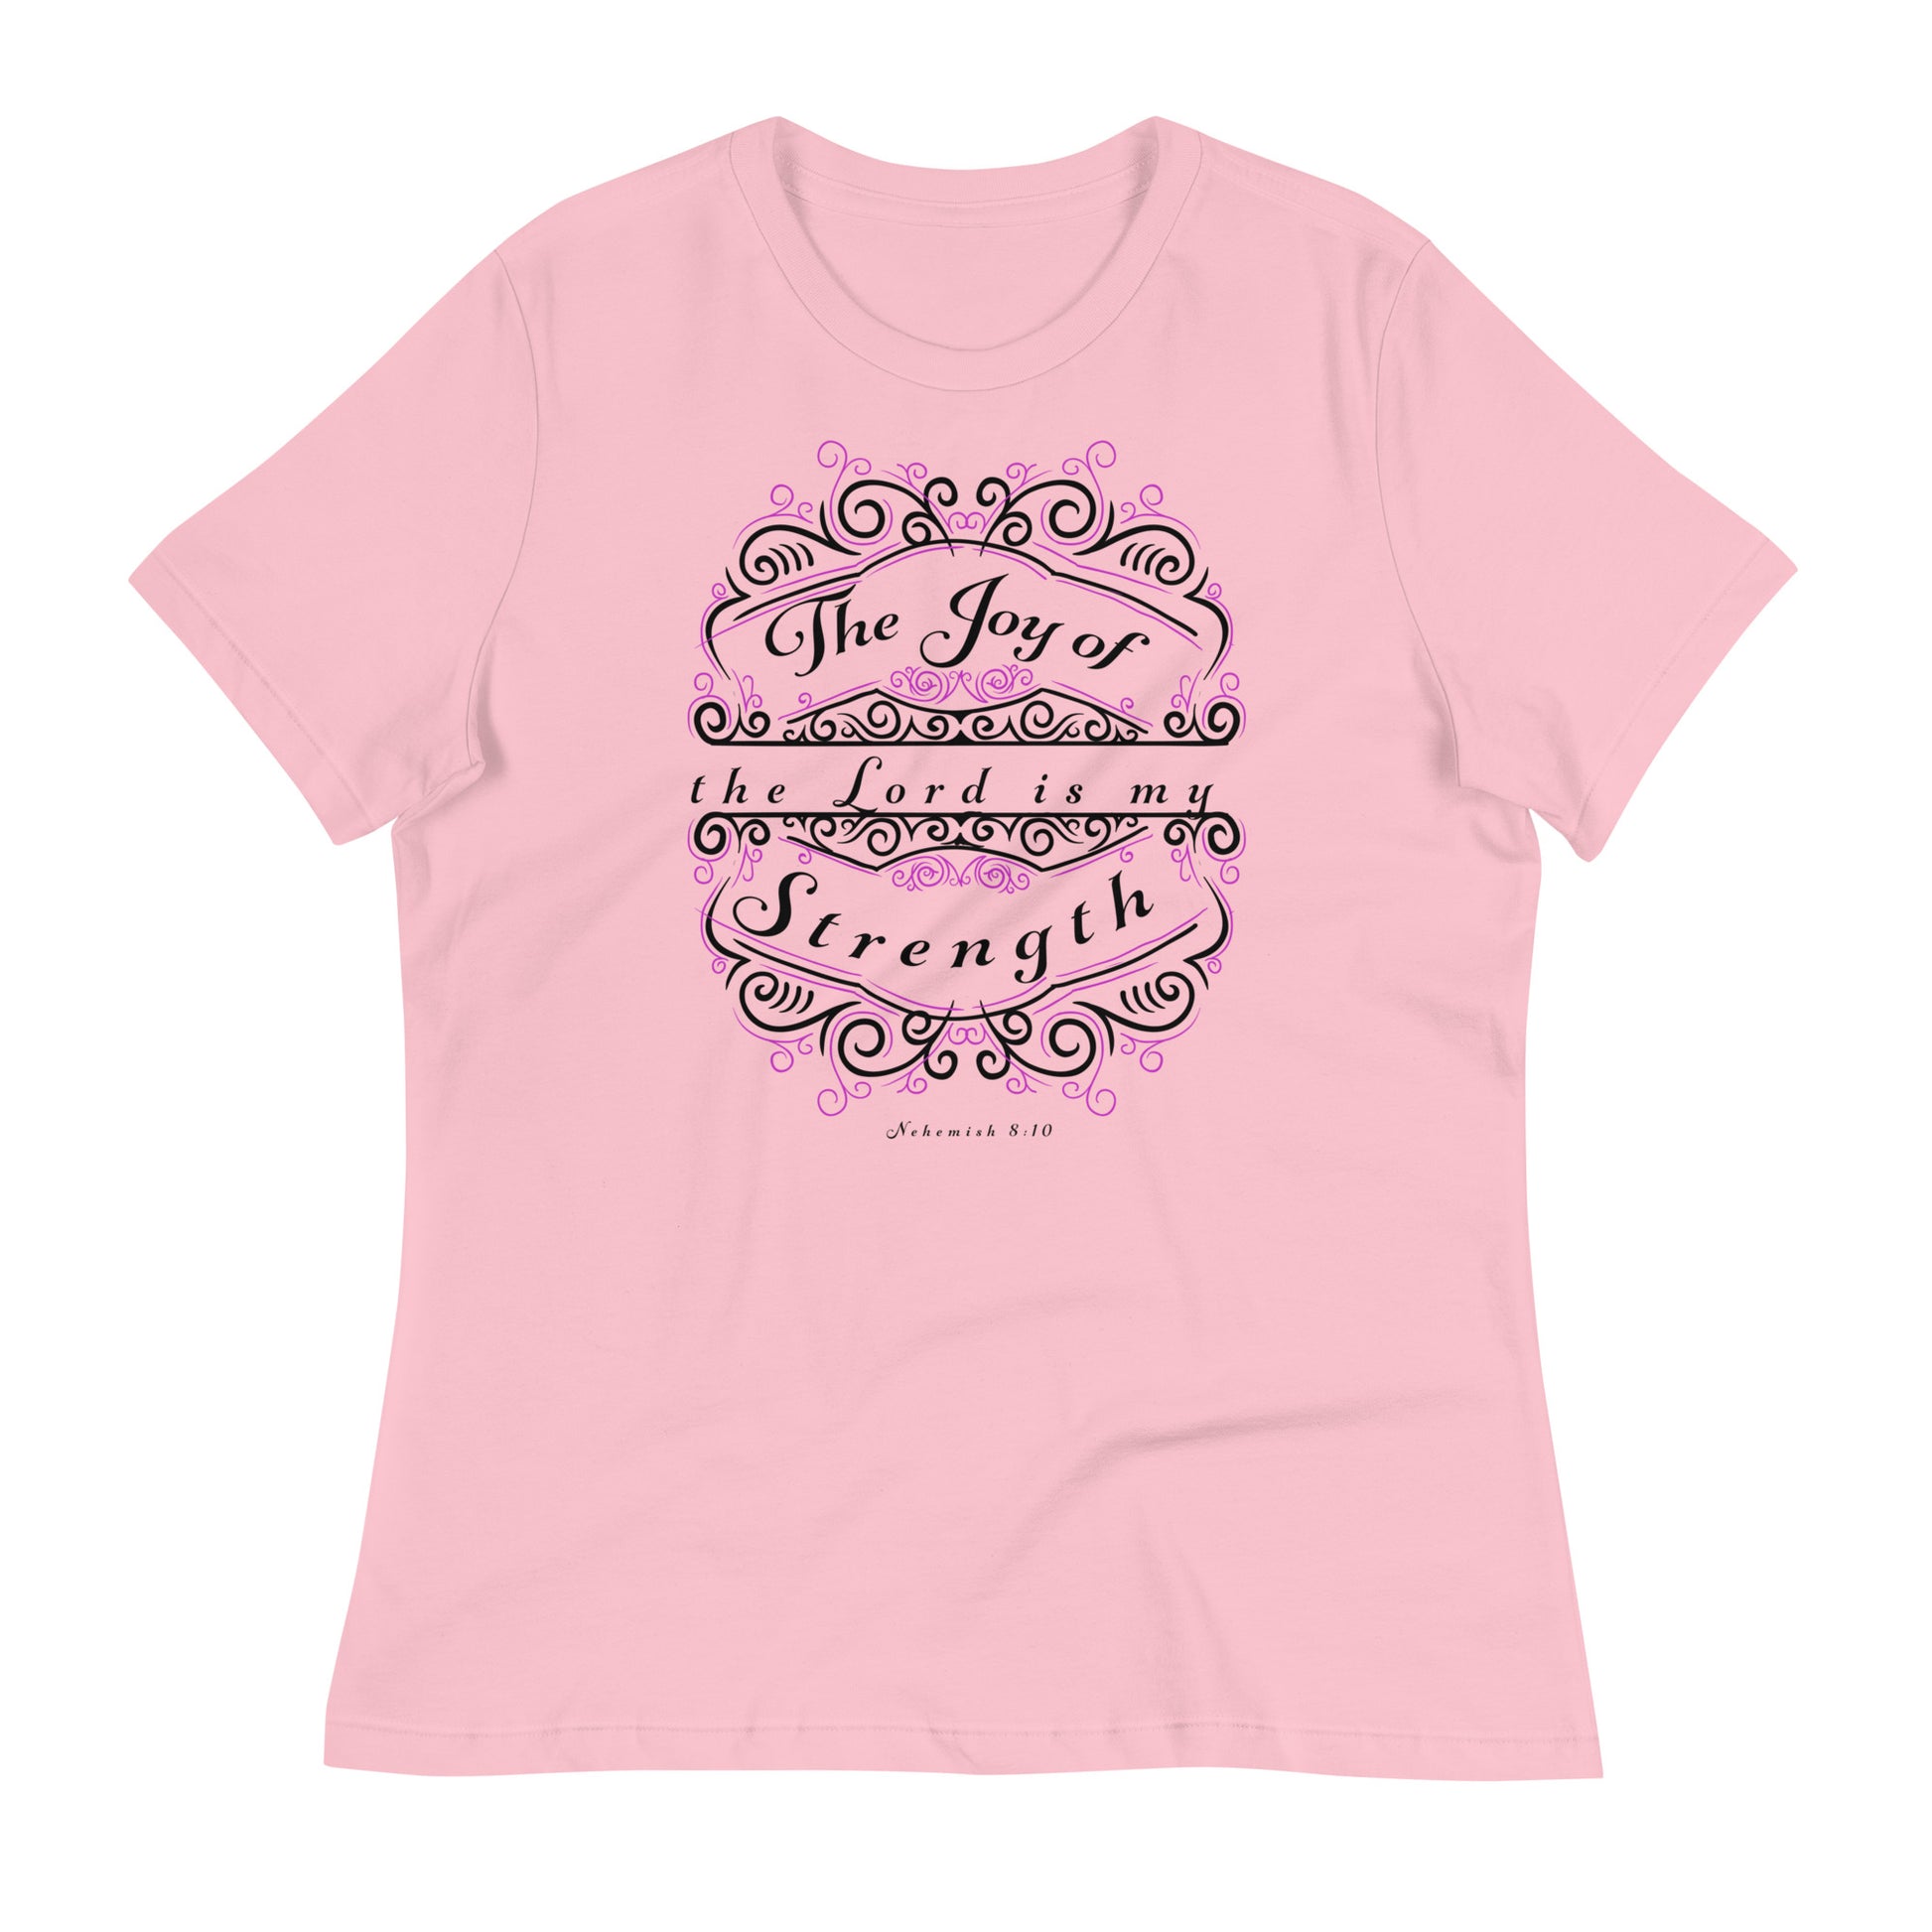 Nehemiah 8:10 relaxed womens t-shirt pink front